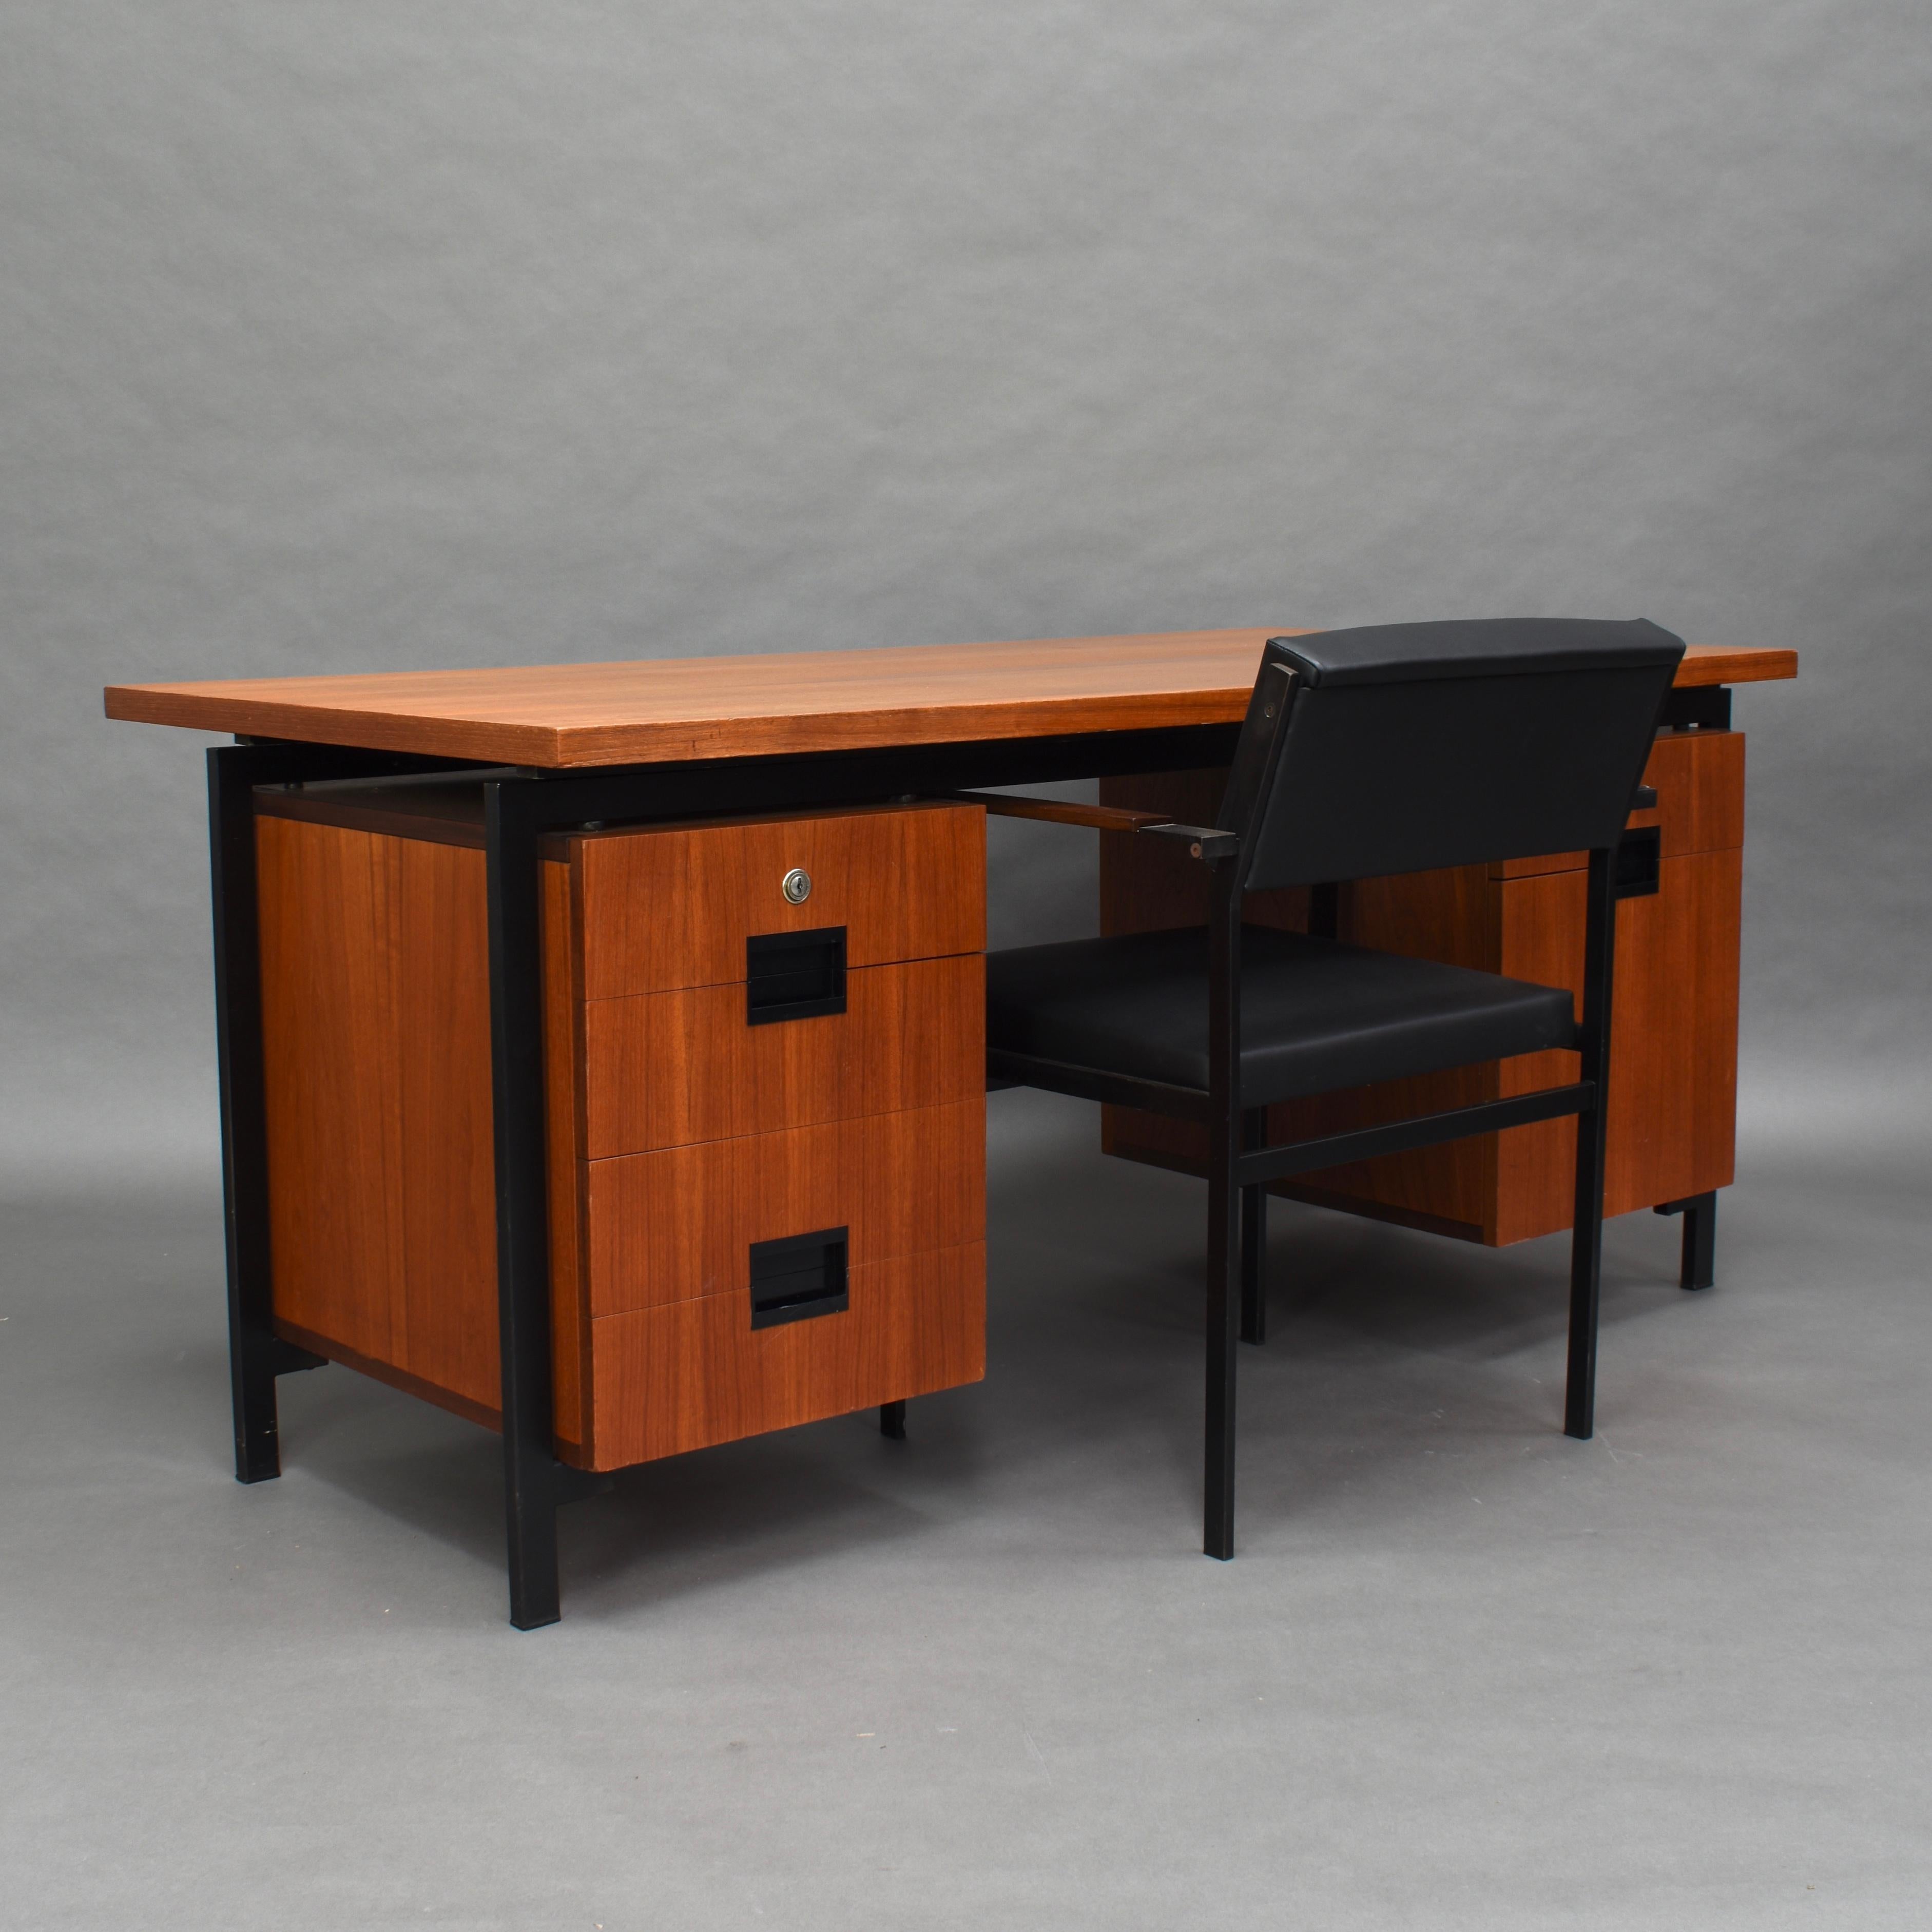 Japanese series desk and chair in teak by Cees Braakman for Pastoe, Netherlands, 1950s. Very cool to find as a matching set.

Model EU-02 desk and FM-17 armchair. The desk still has the original Pastoe key.

The small drawers are made of bent